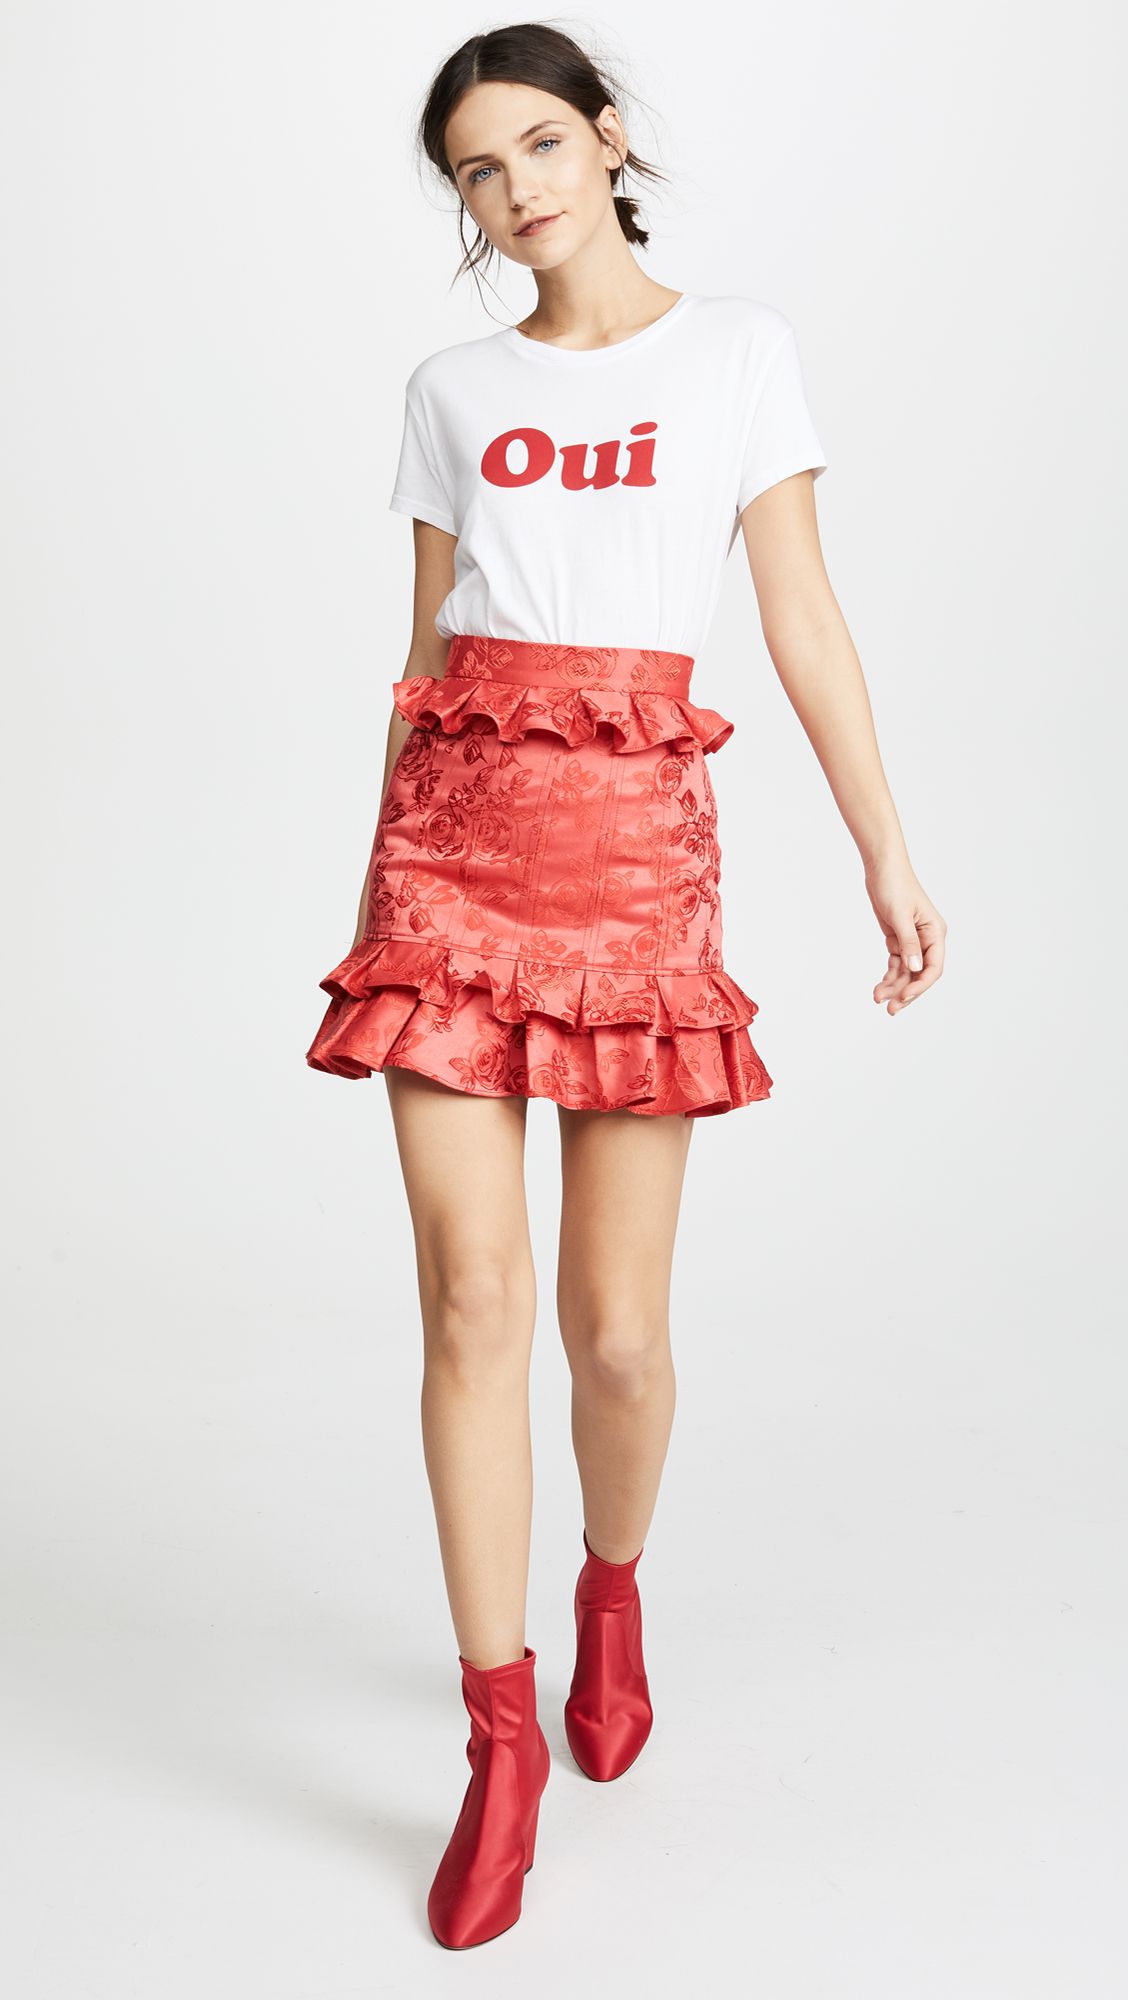 bare a little leg with these miniskirts for spring